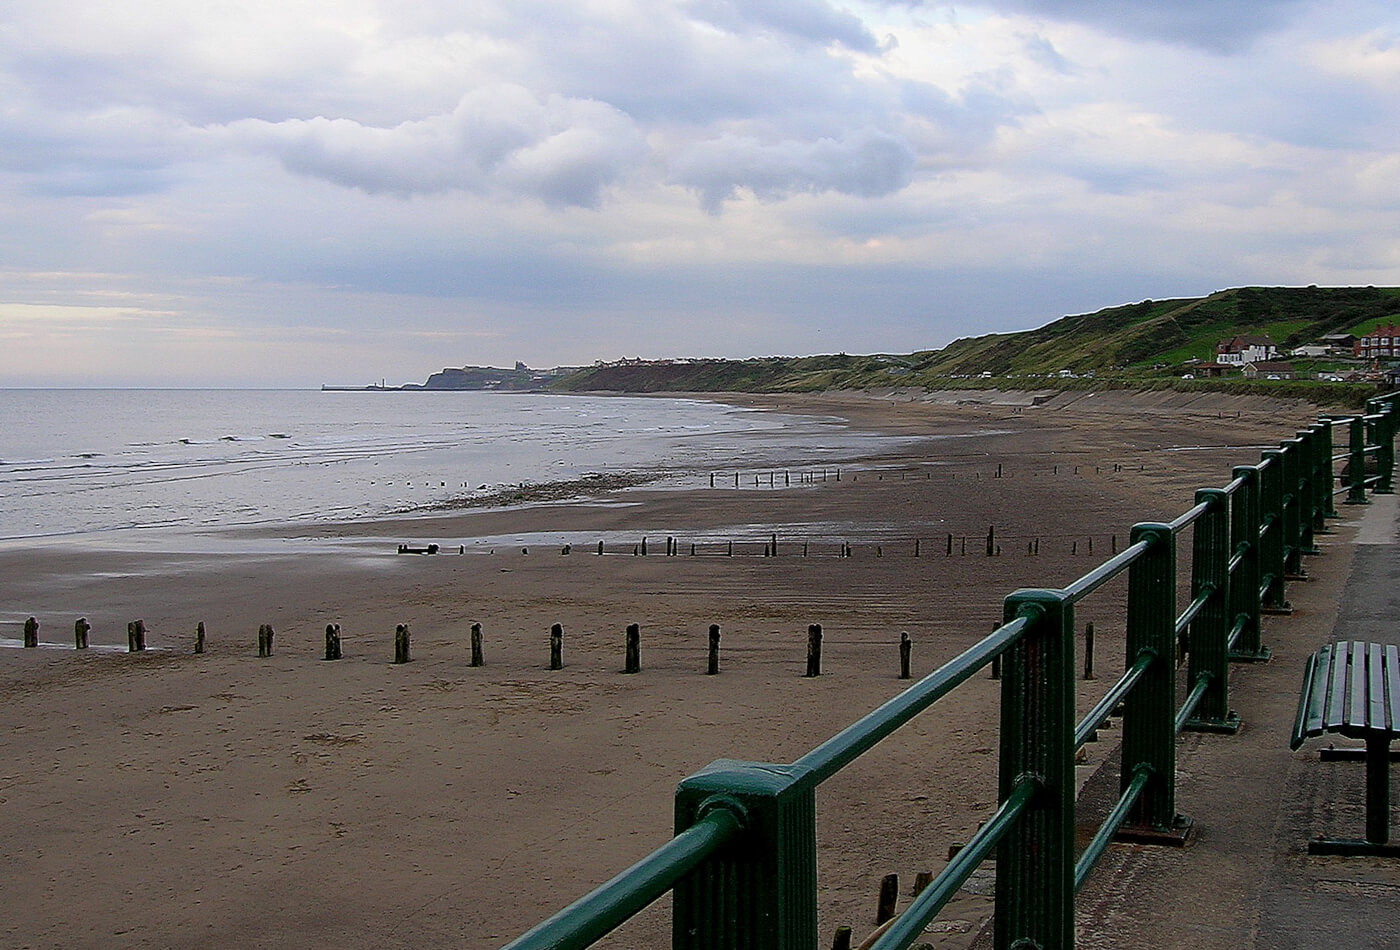 A view across Sandsend Beach from the Promenade behind